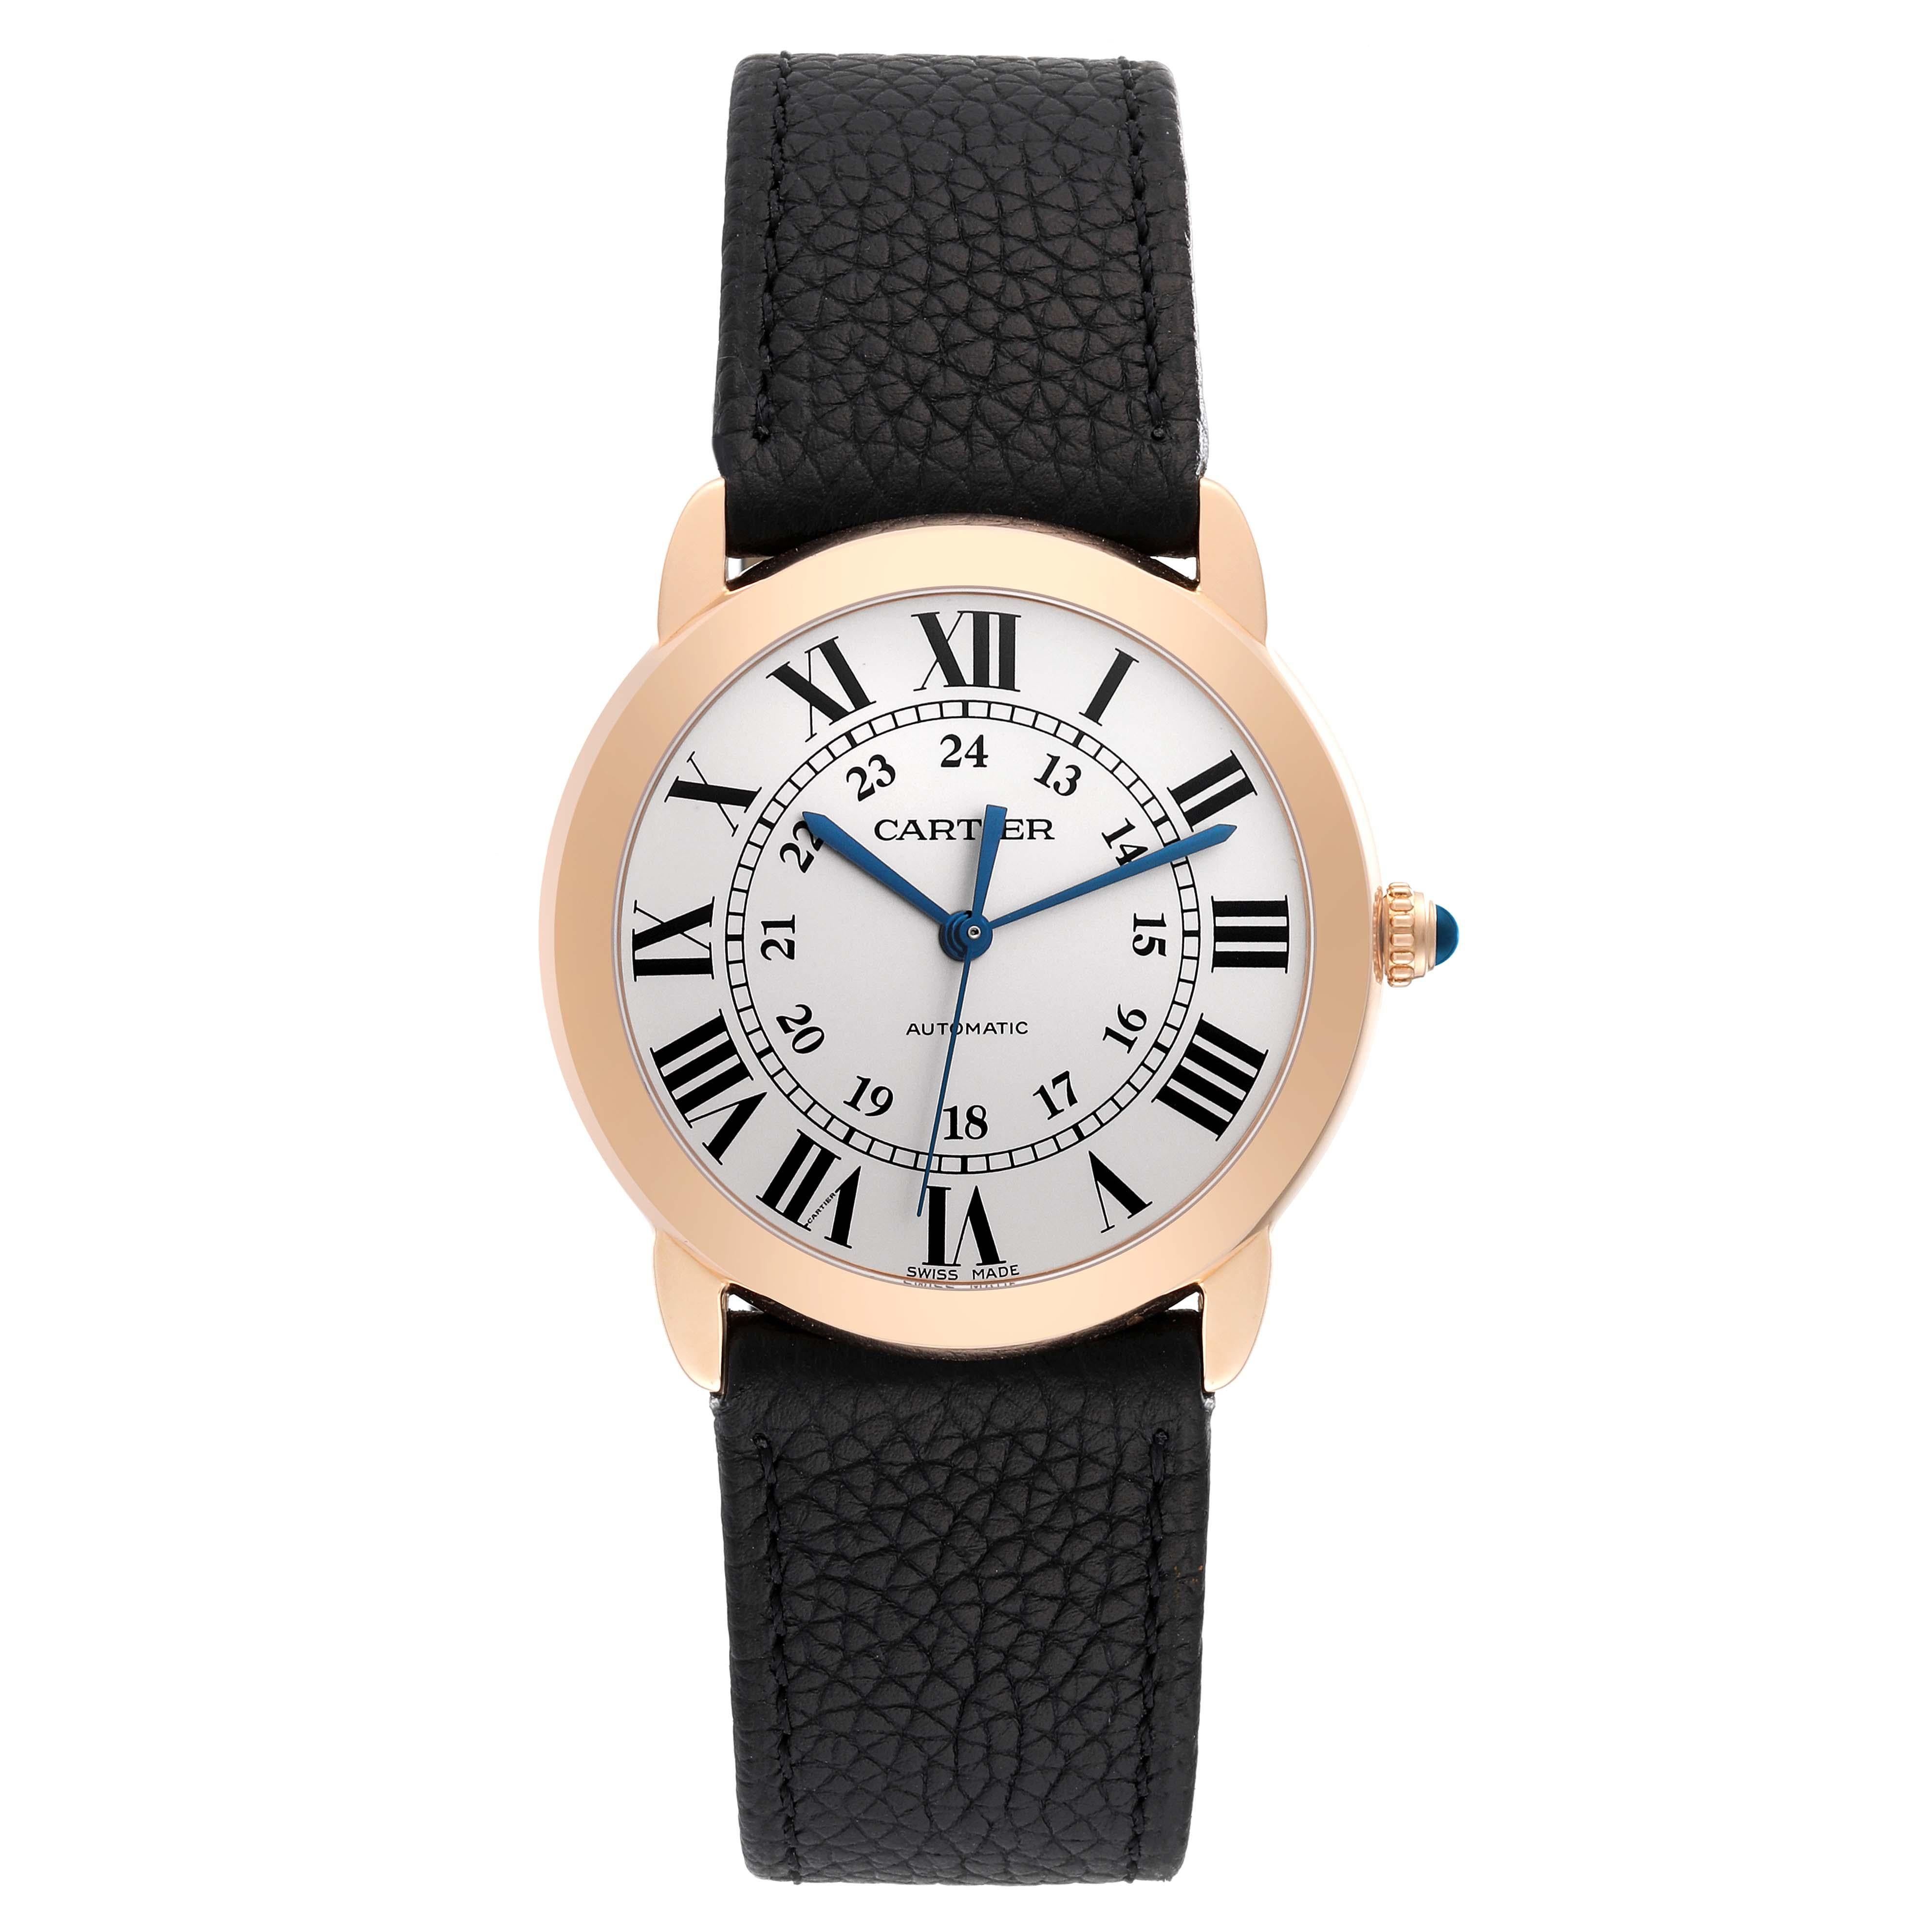 Cartier Ronde Solo 36mm Steel Rose Gold Automatic Mens Watch W2RN0008 Box Papers. Automatic self-winding movement. 18K rose gold and stainless steel case 36.0 mm in diameter. Circular grained crown set with the blue spinel cabochon. . Scratch